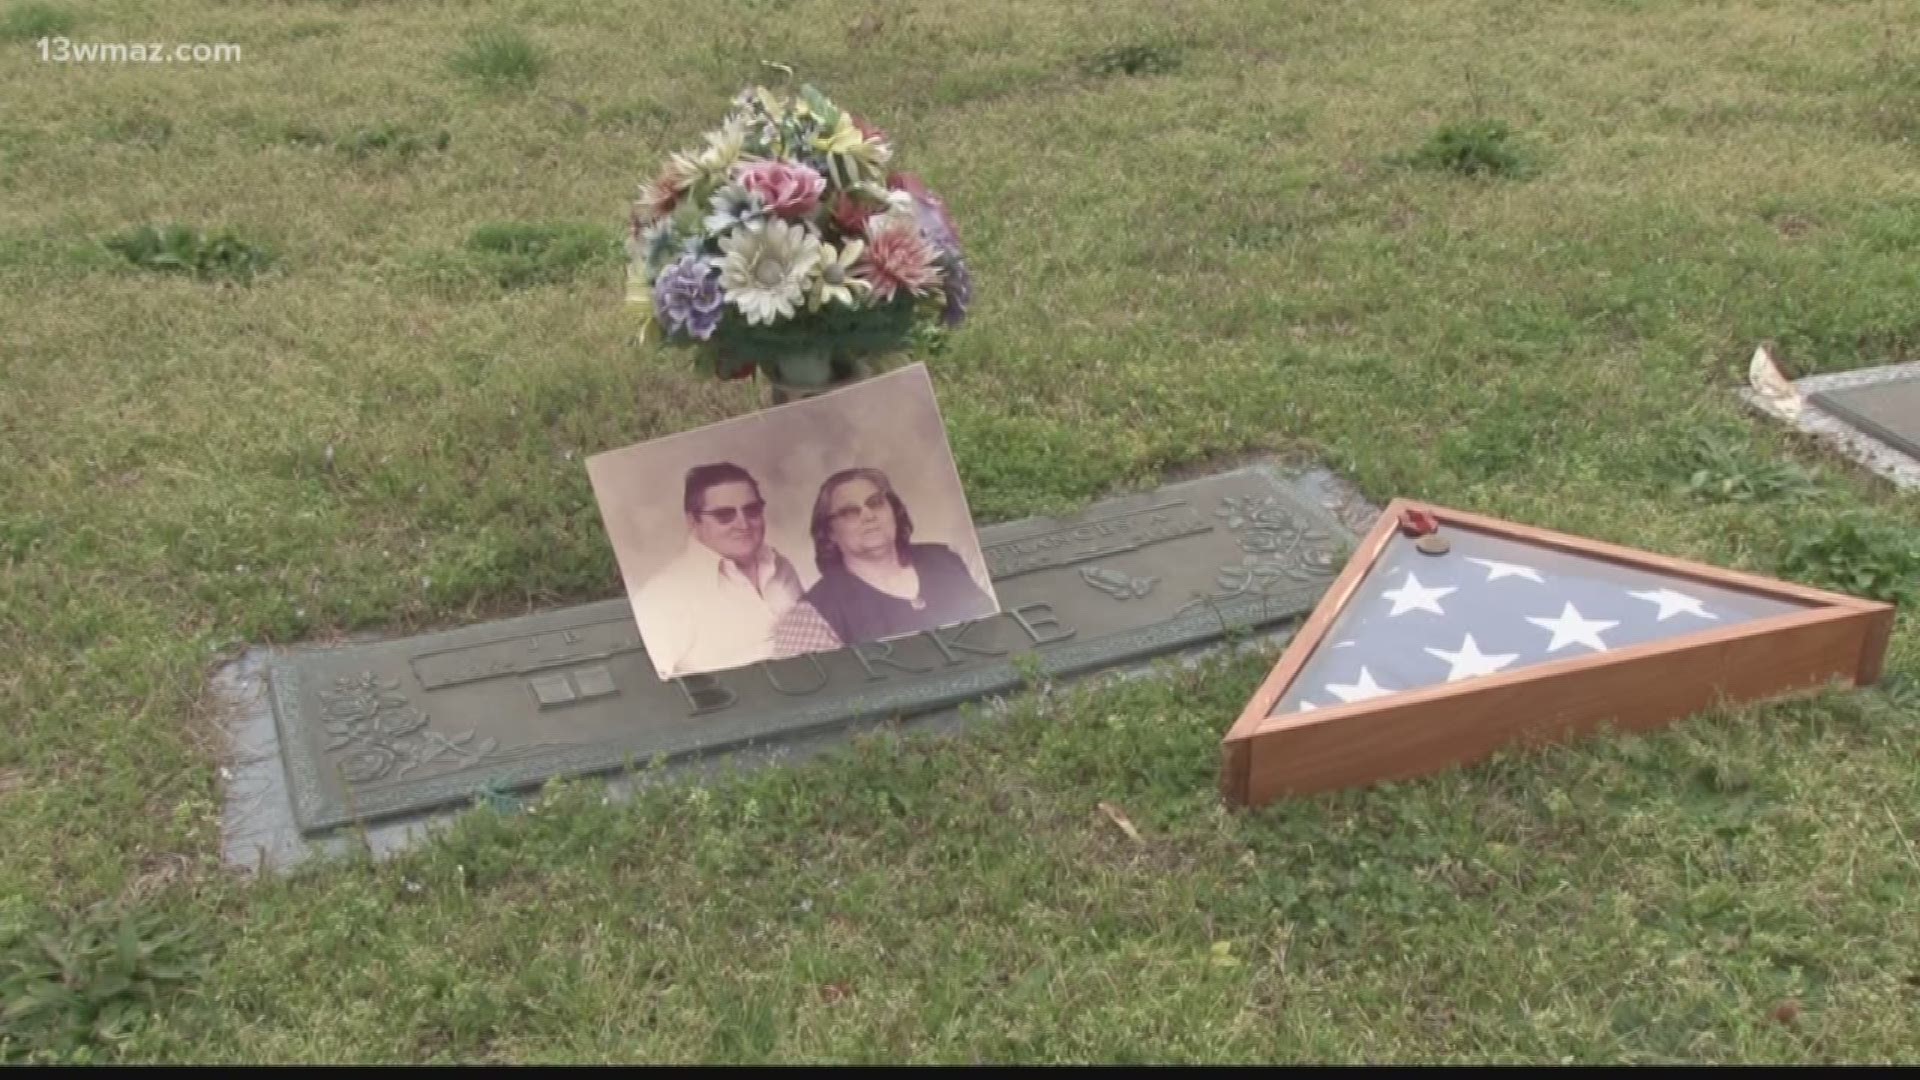 One man is pressing charges after years of damage to his family's grave sites in Jones County. After efforts to get repairs, he wants to remove their remains.